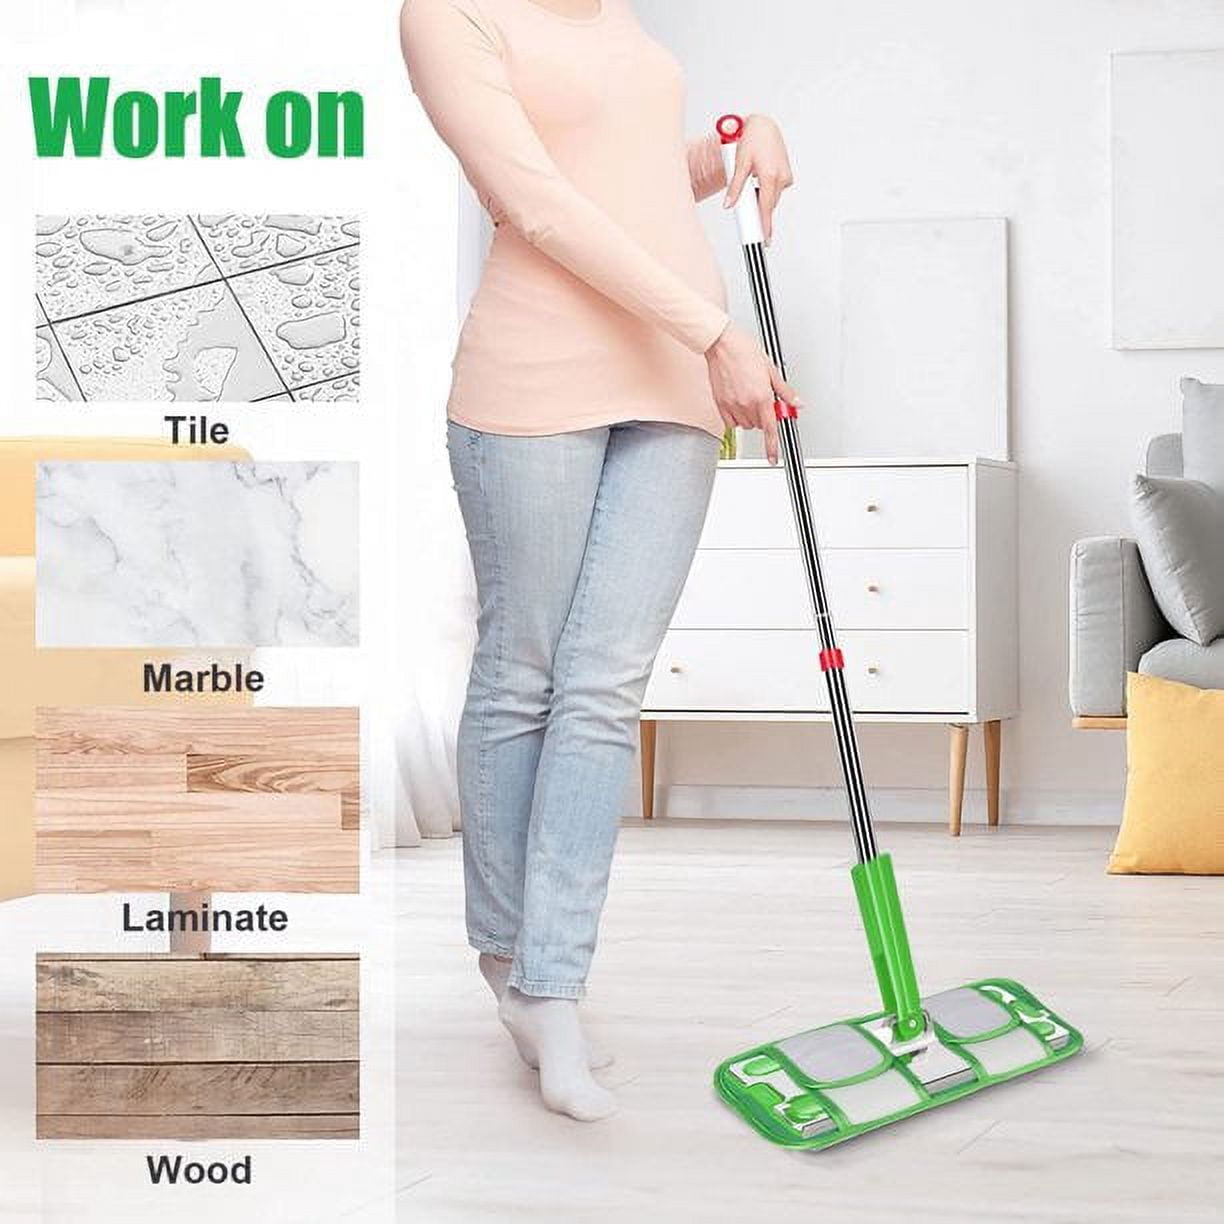 HOMEXCEL Microfiber Mop Pads Compatible with Swiffer Sweeper Mops, Reusable and Machine Washable Floor Mop Pad Refills, Mop Head